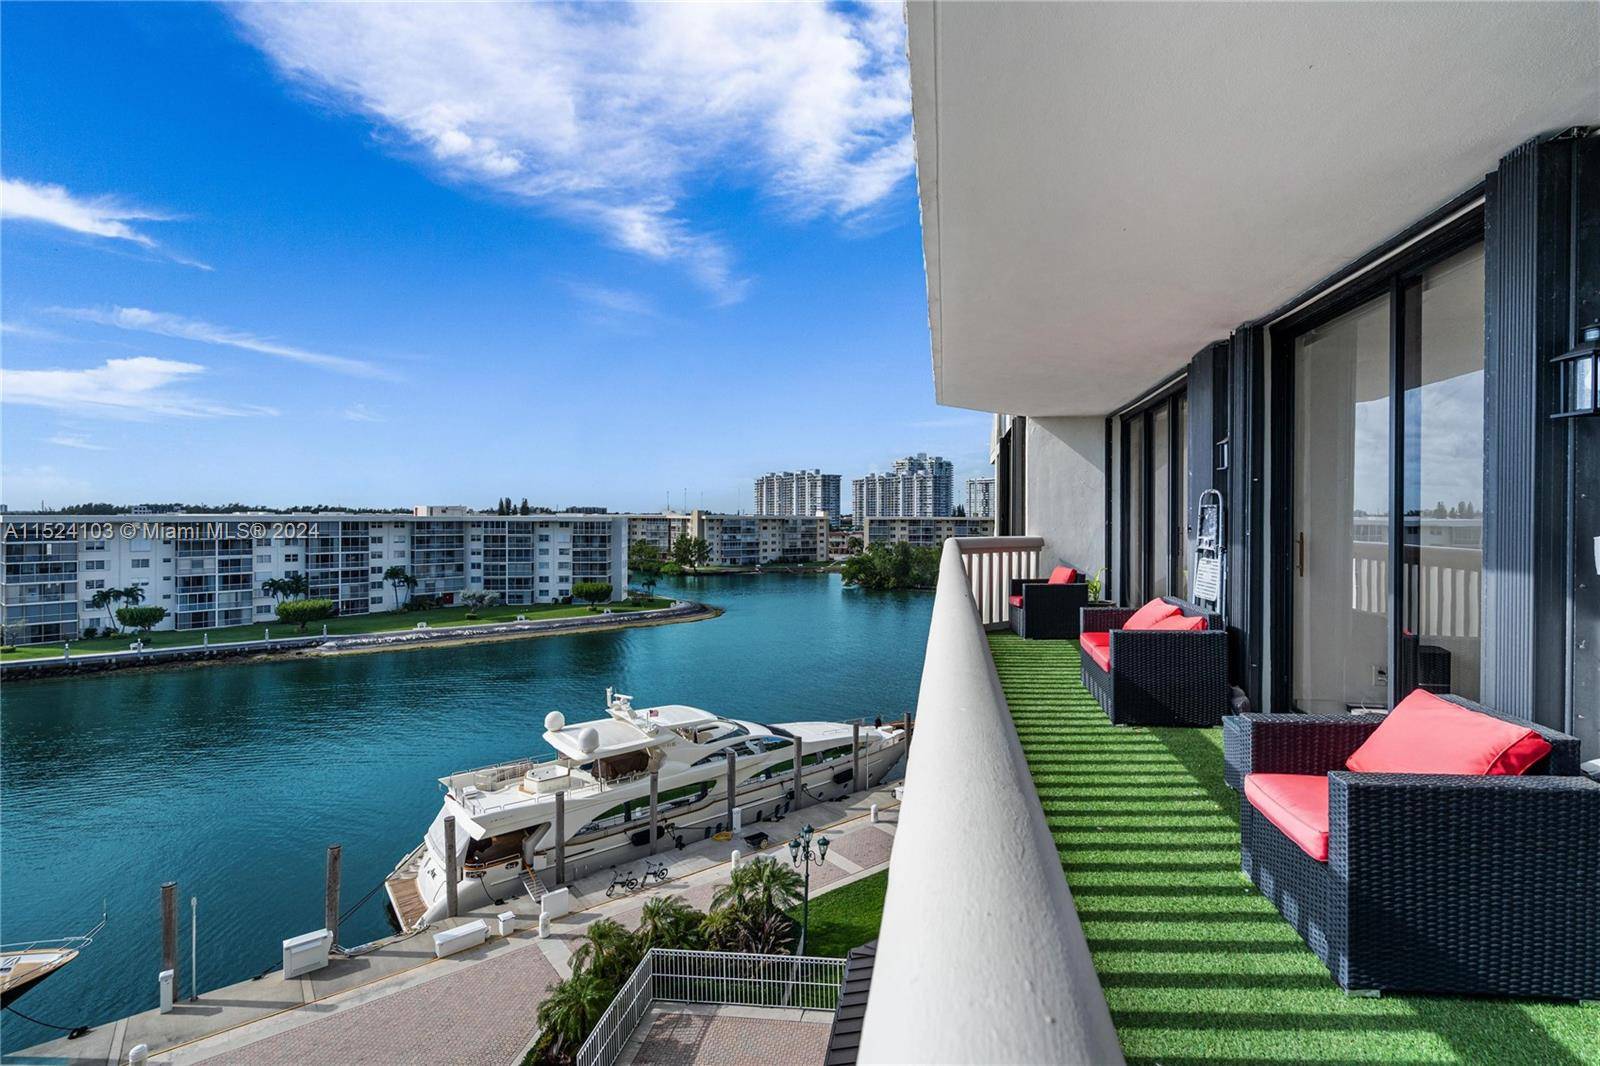 Discover the pinnacle of luxury living at the prestigious Williams Island with this 2 bed, 2 bath haven offering breathtaking direct water views.